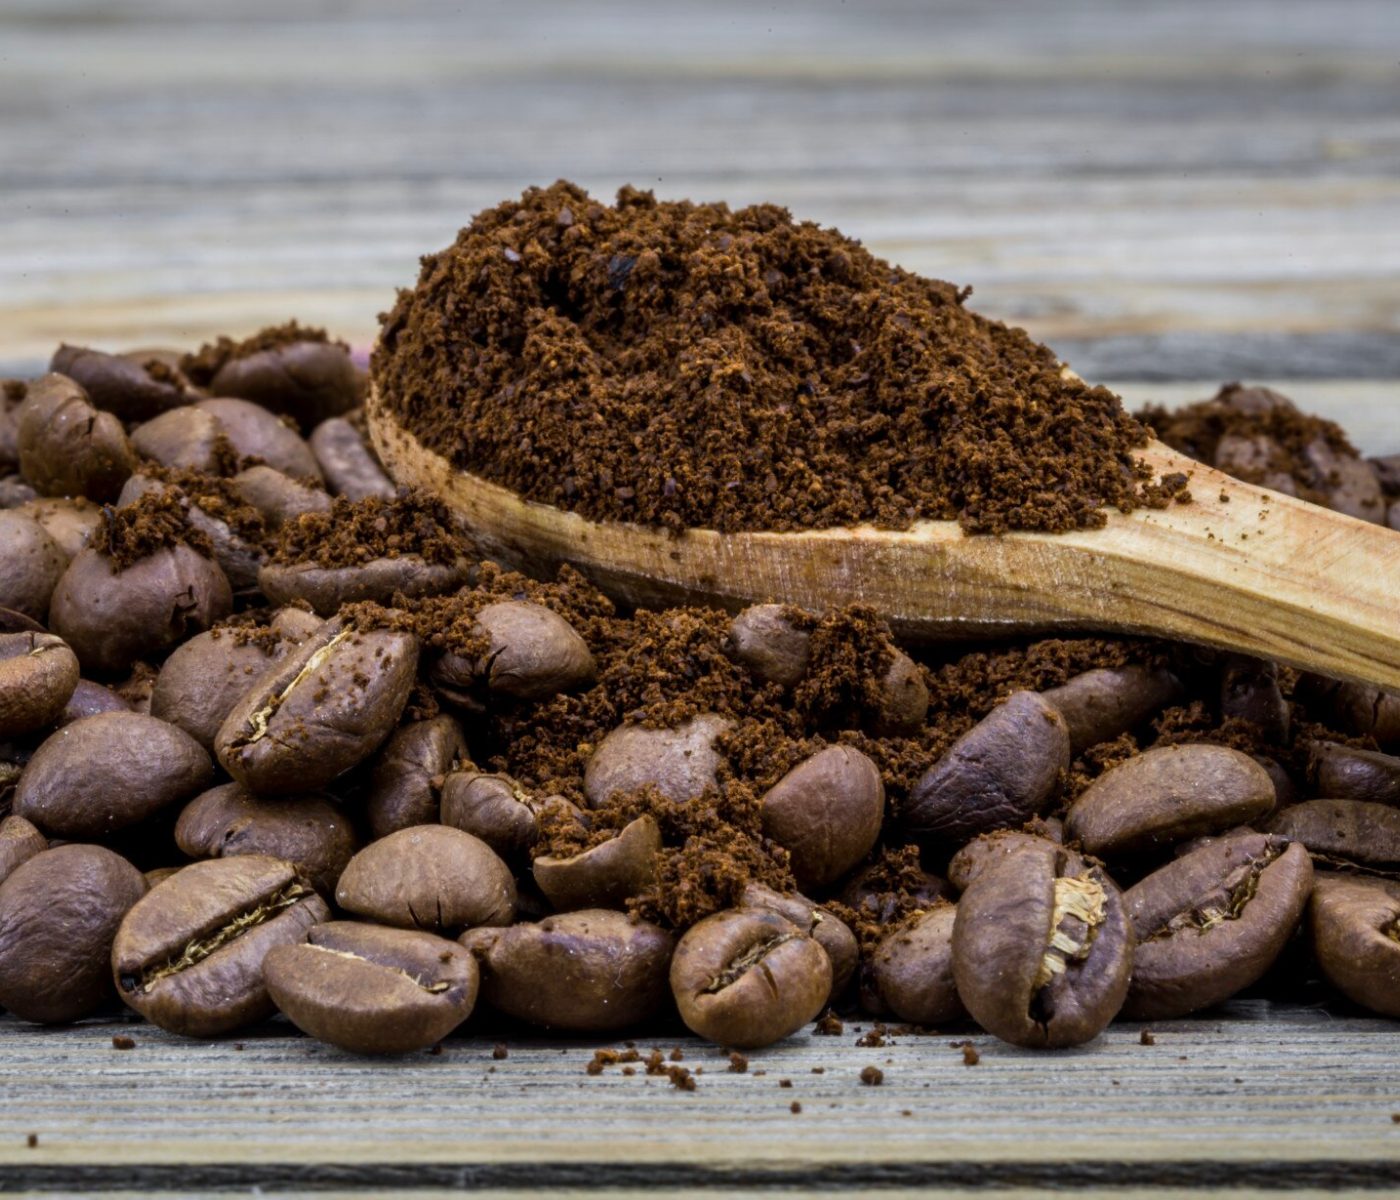 A new purpose for coffee grounds